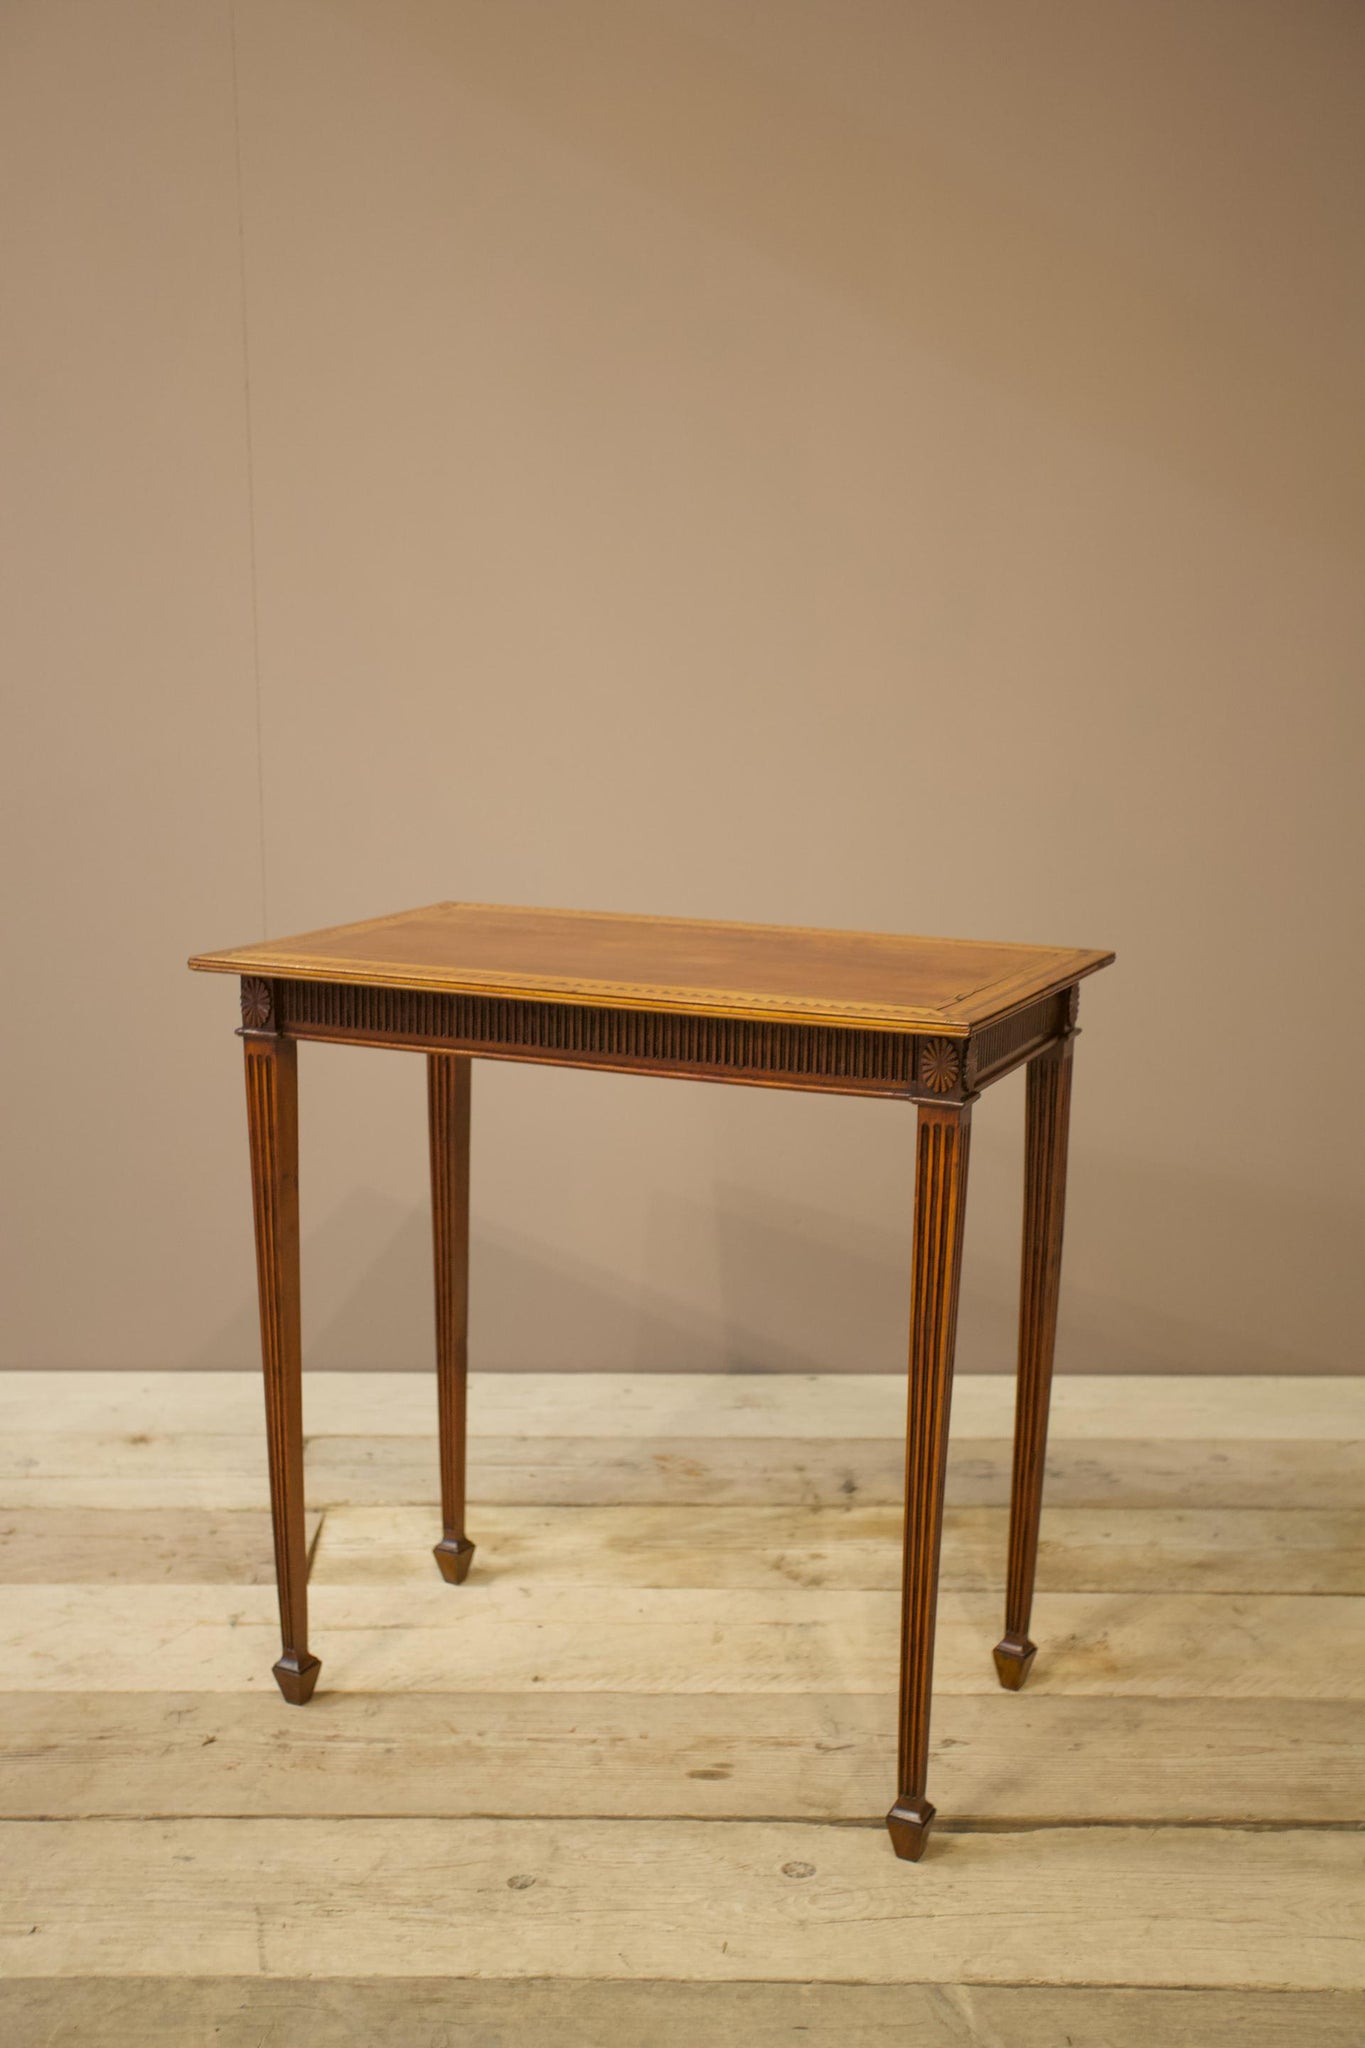 Edwardian Cherrywood side table with marquetry details